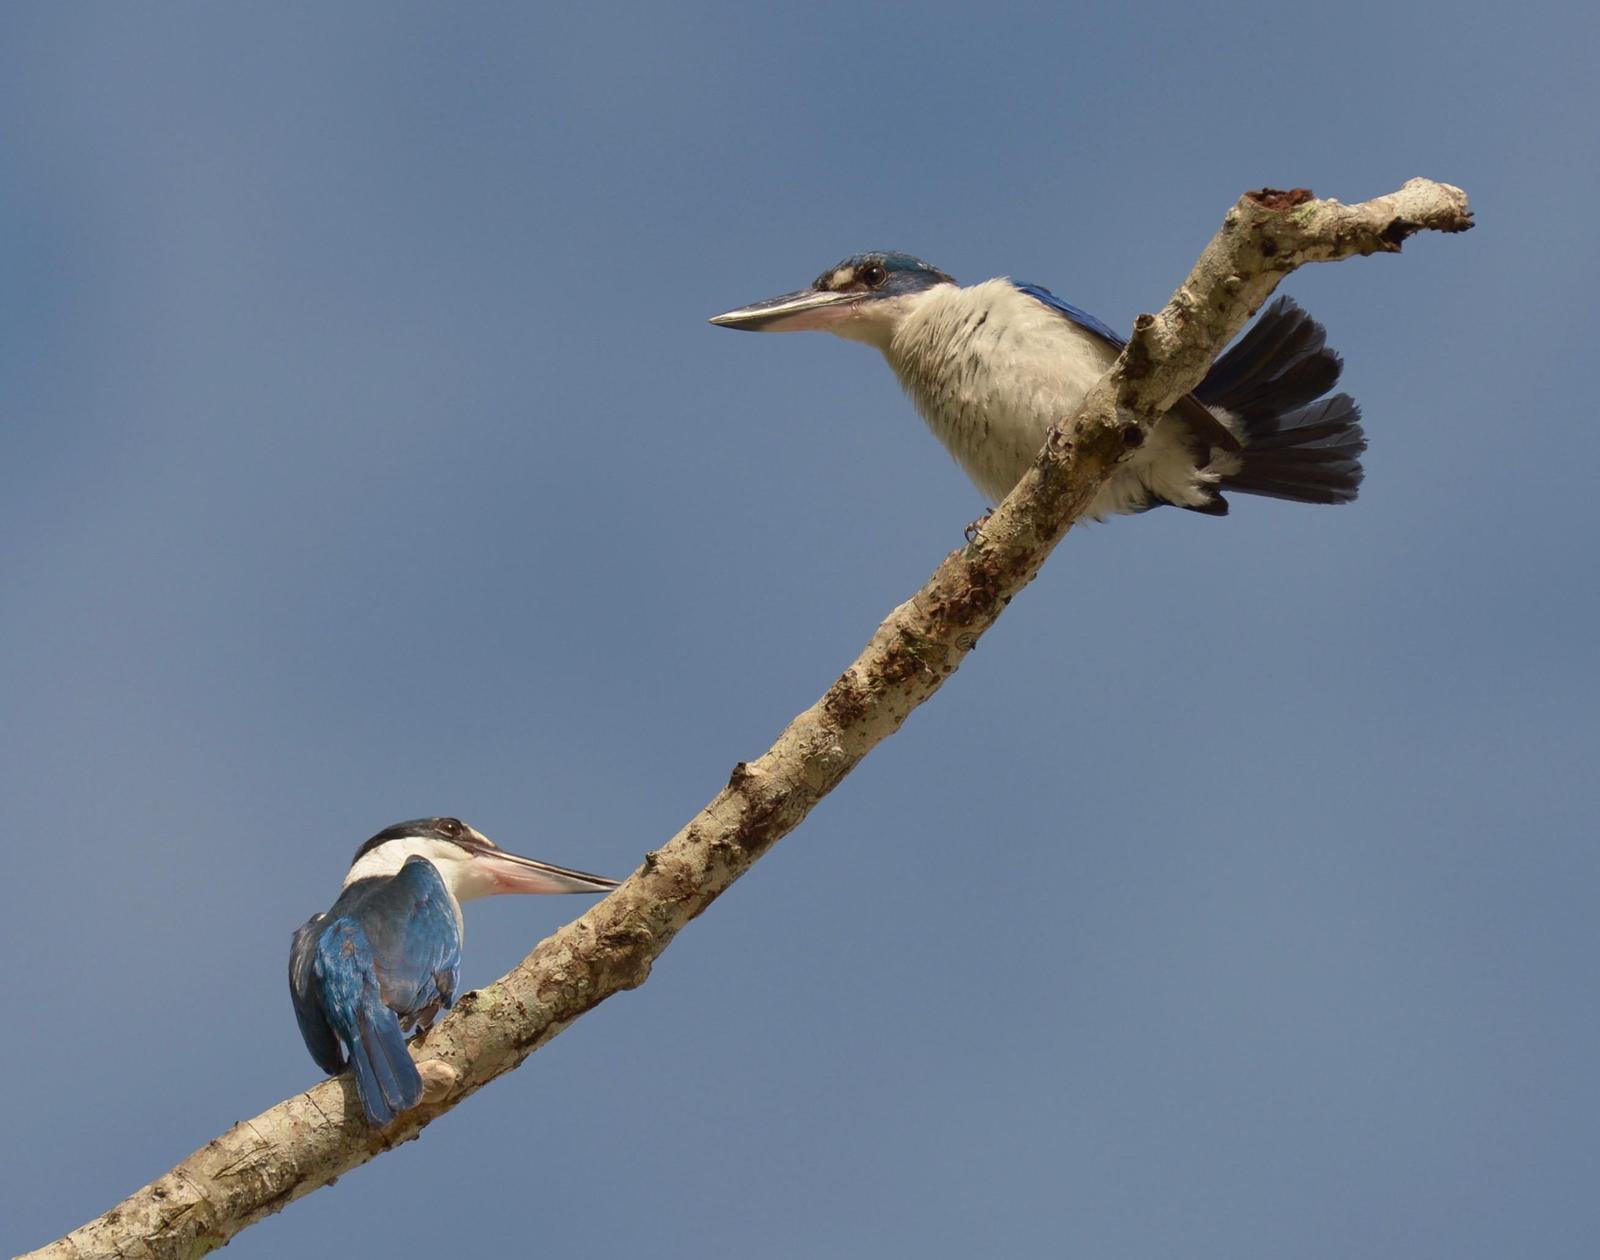 Collared Kingfisher Photo by marcel finlay